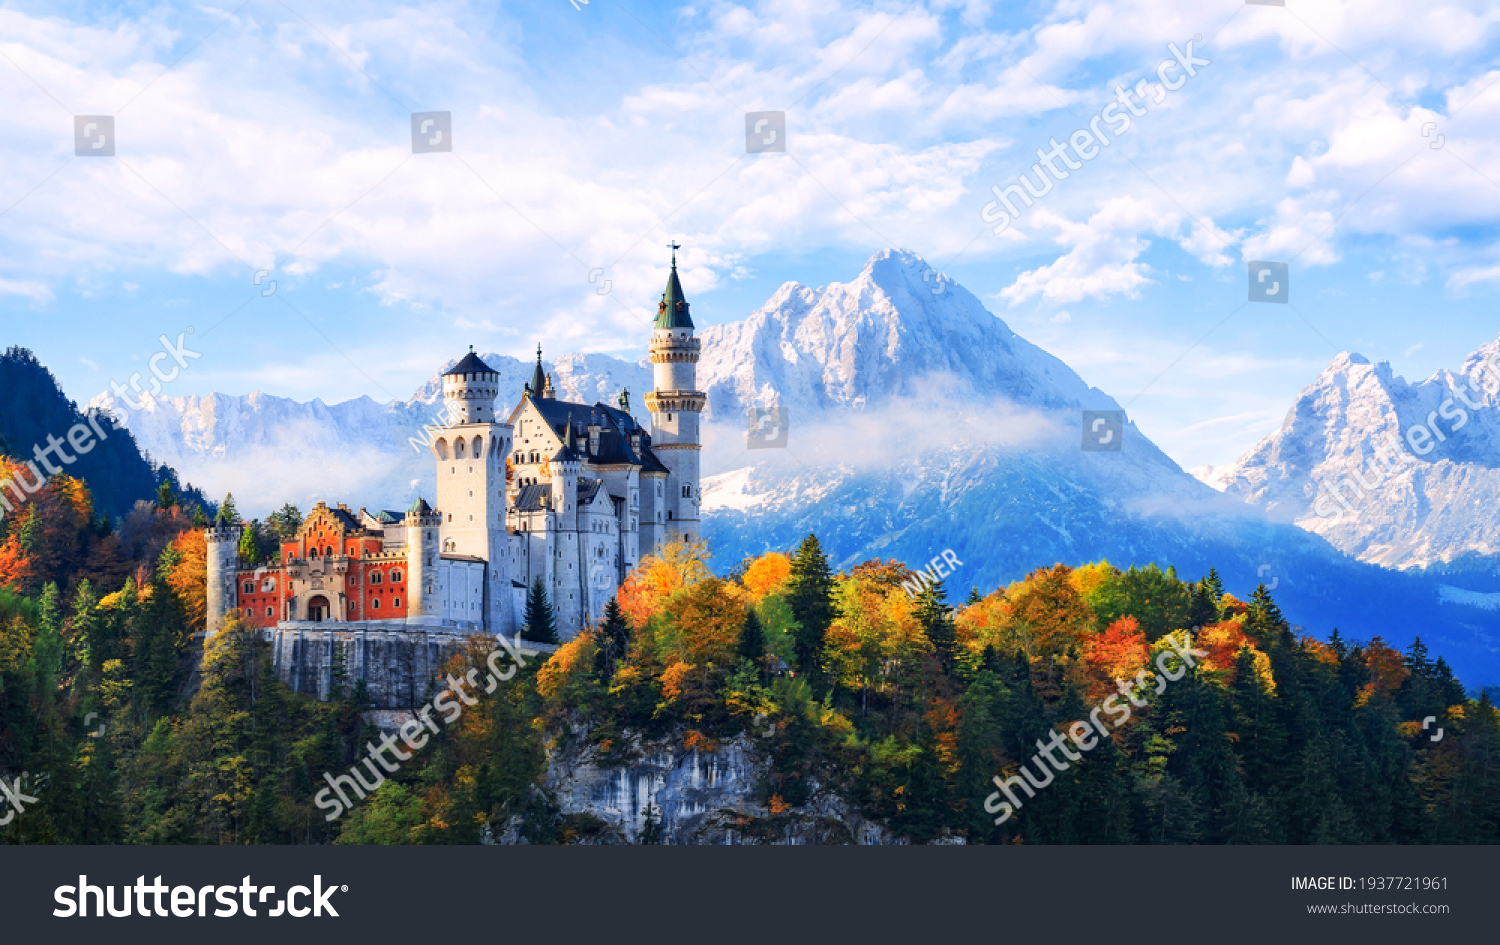 Beautiful view of Neuschwanstein castle in the Bavarian Alps, Germany. #1937721961